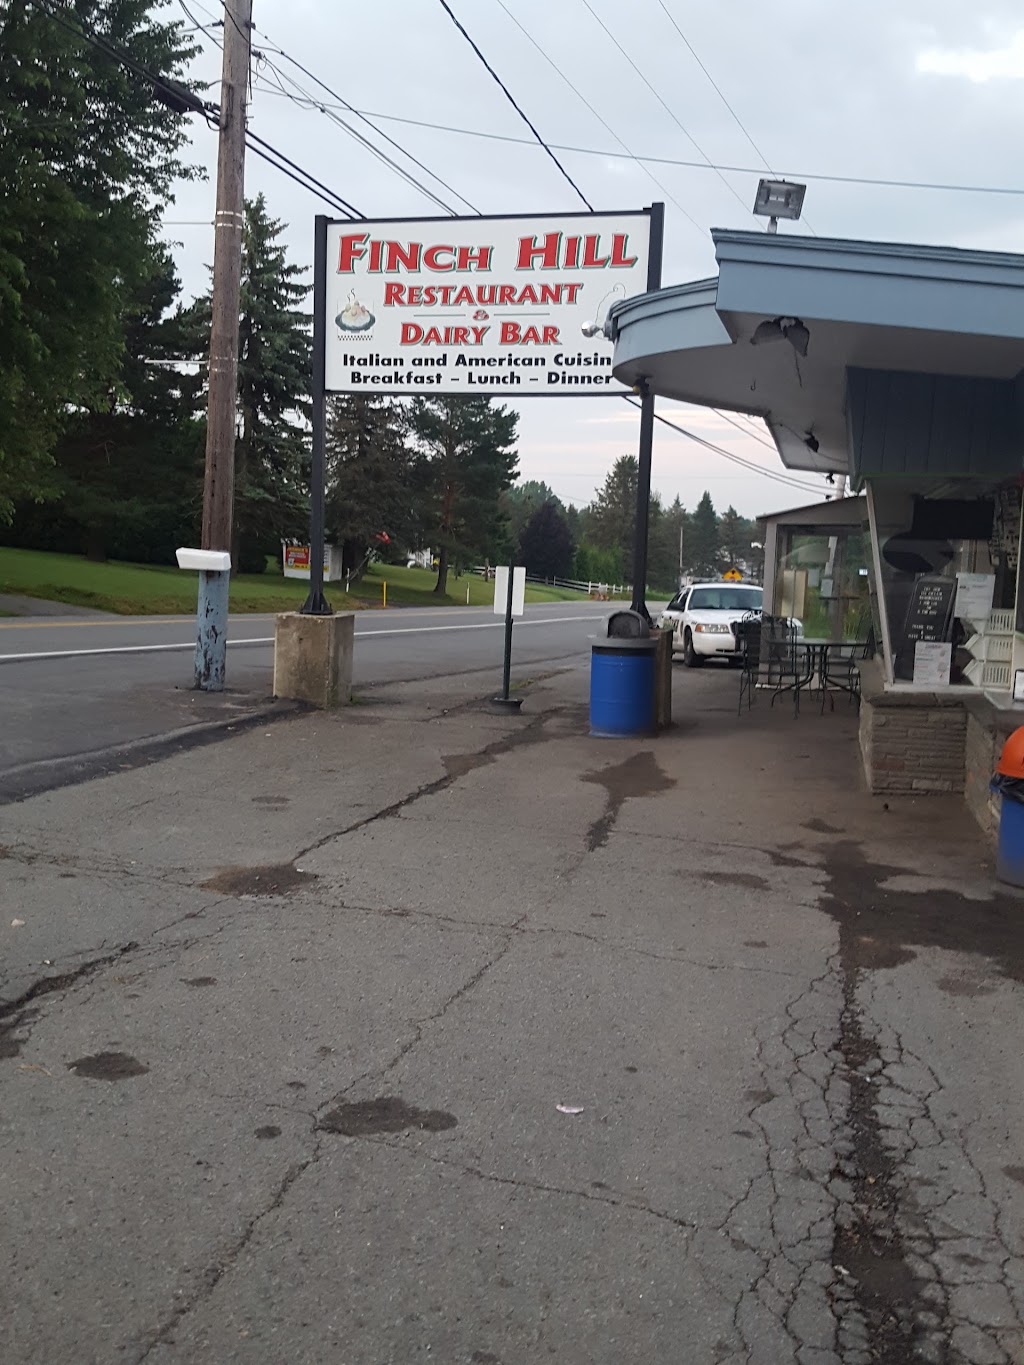 Finch Hill Restaurant and Dairy Bar | 393 PA-247, Greenfield Township, PA 18407 | Phone: (570) 282-6750